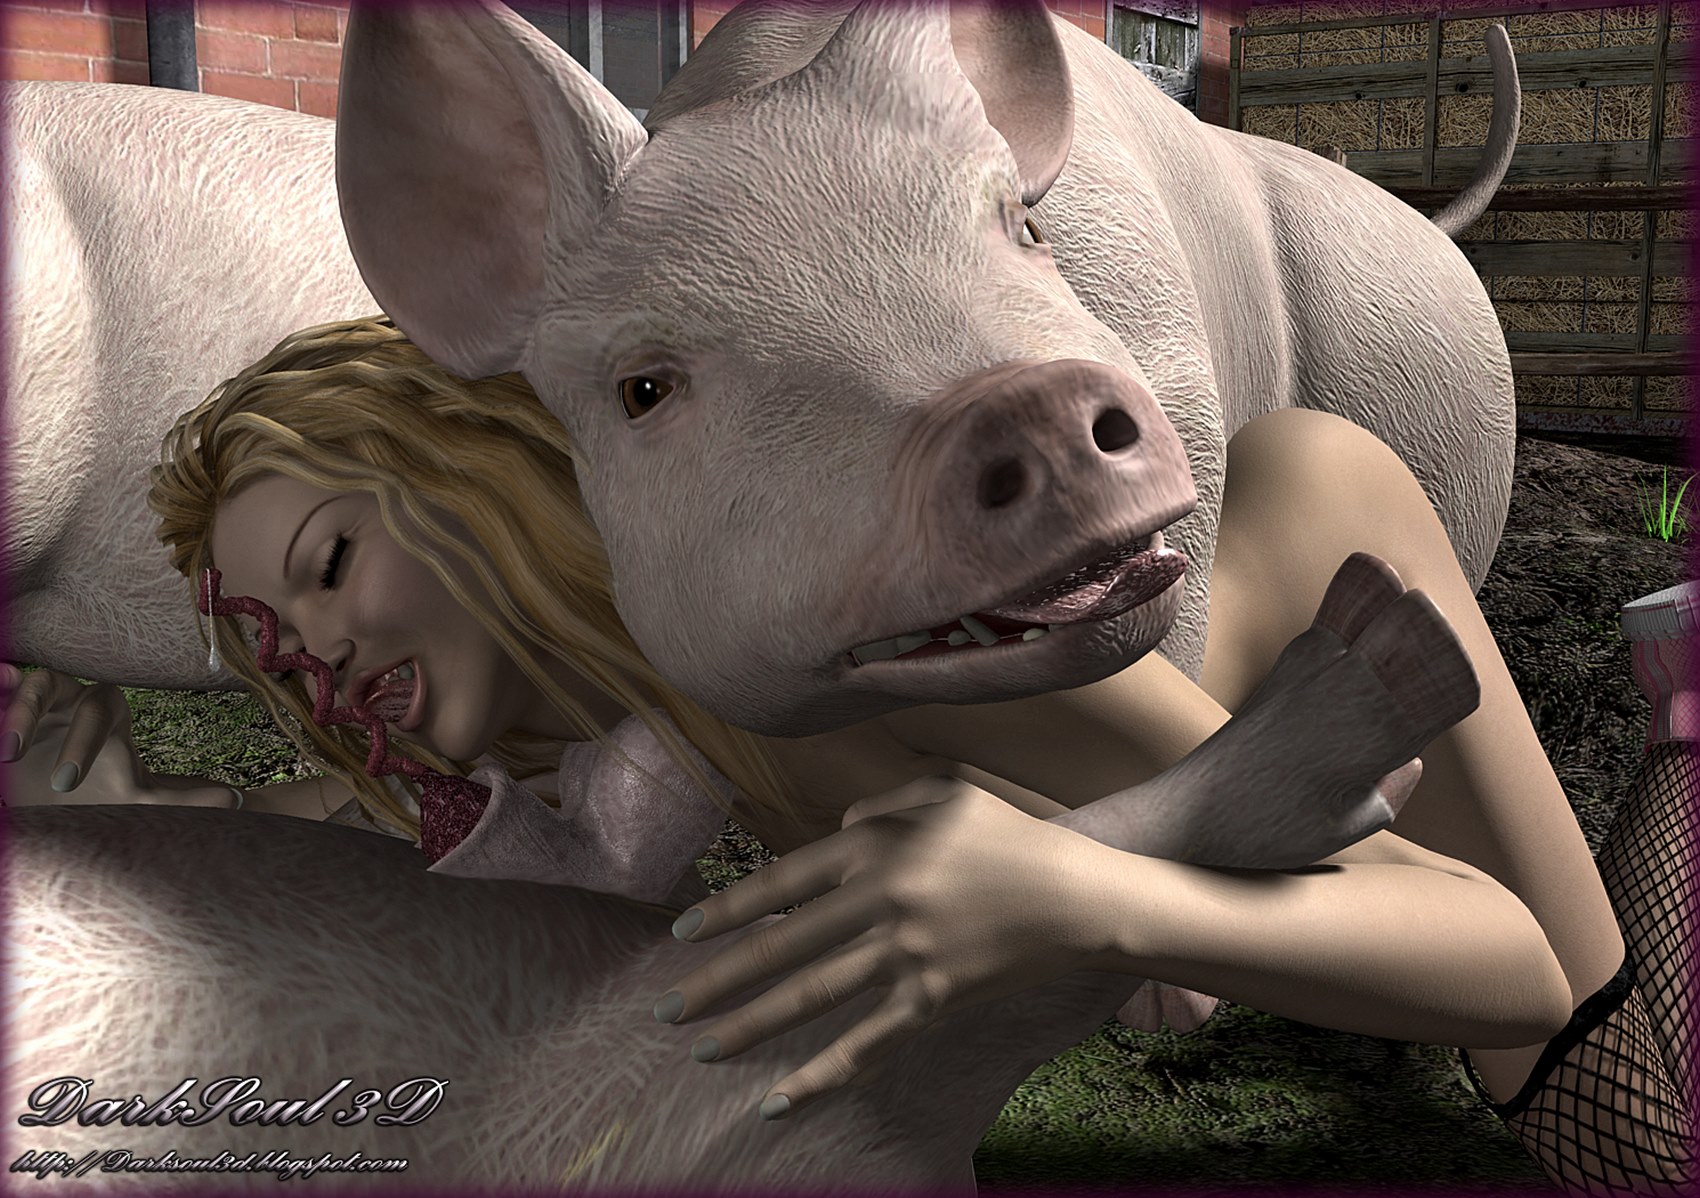 Girls having sex with pigs fan compilations